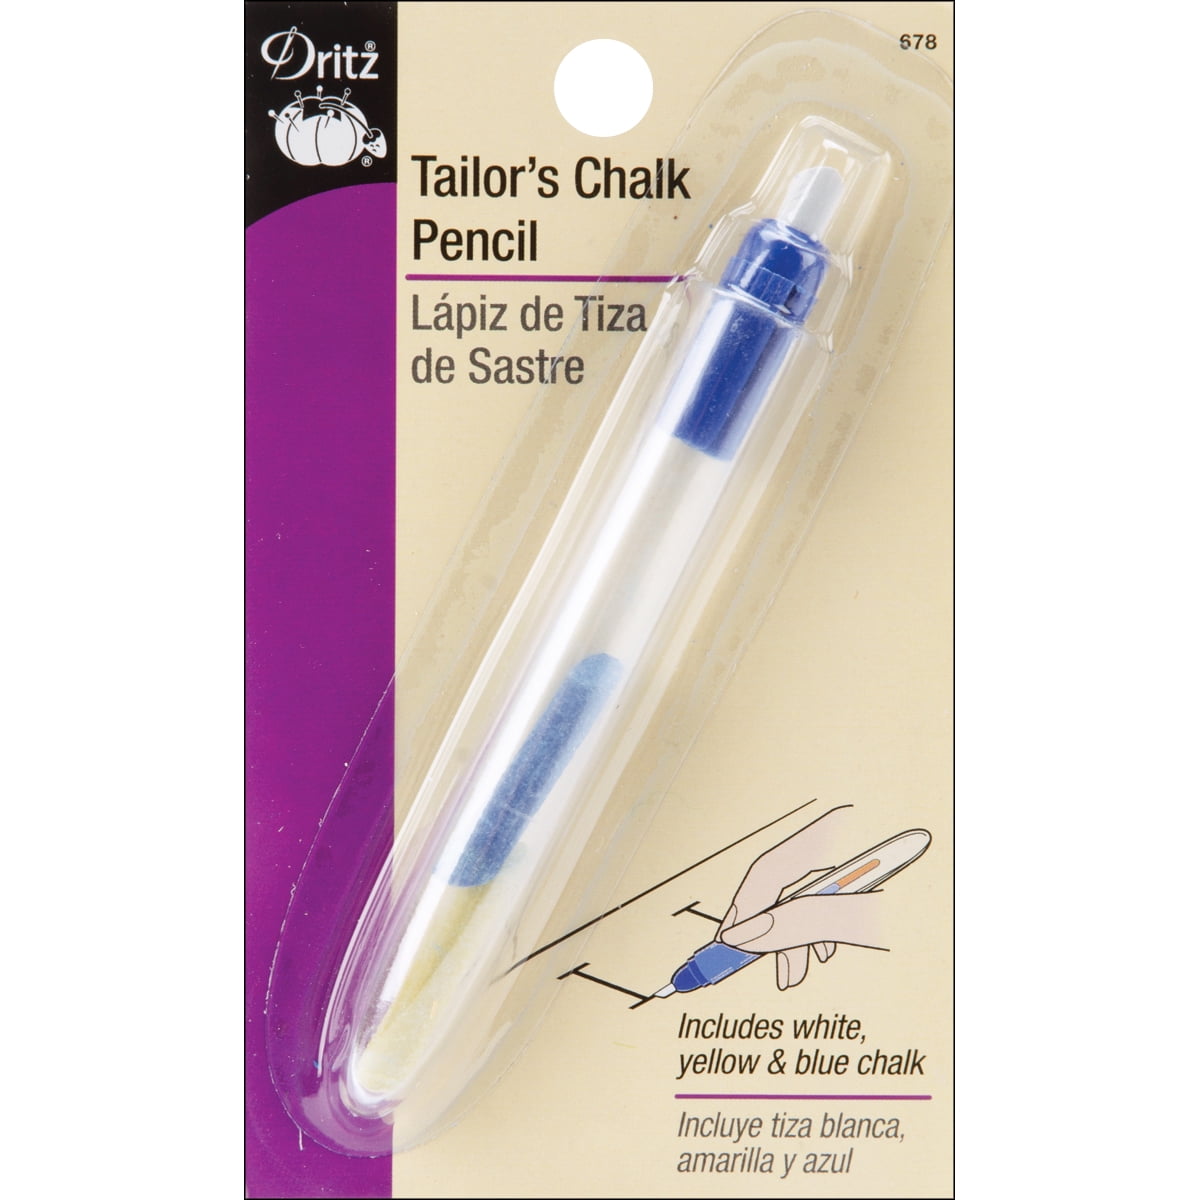 Colonial Needle Water Soluble Chalk Marking Pencils, White/Silver - 4 pack